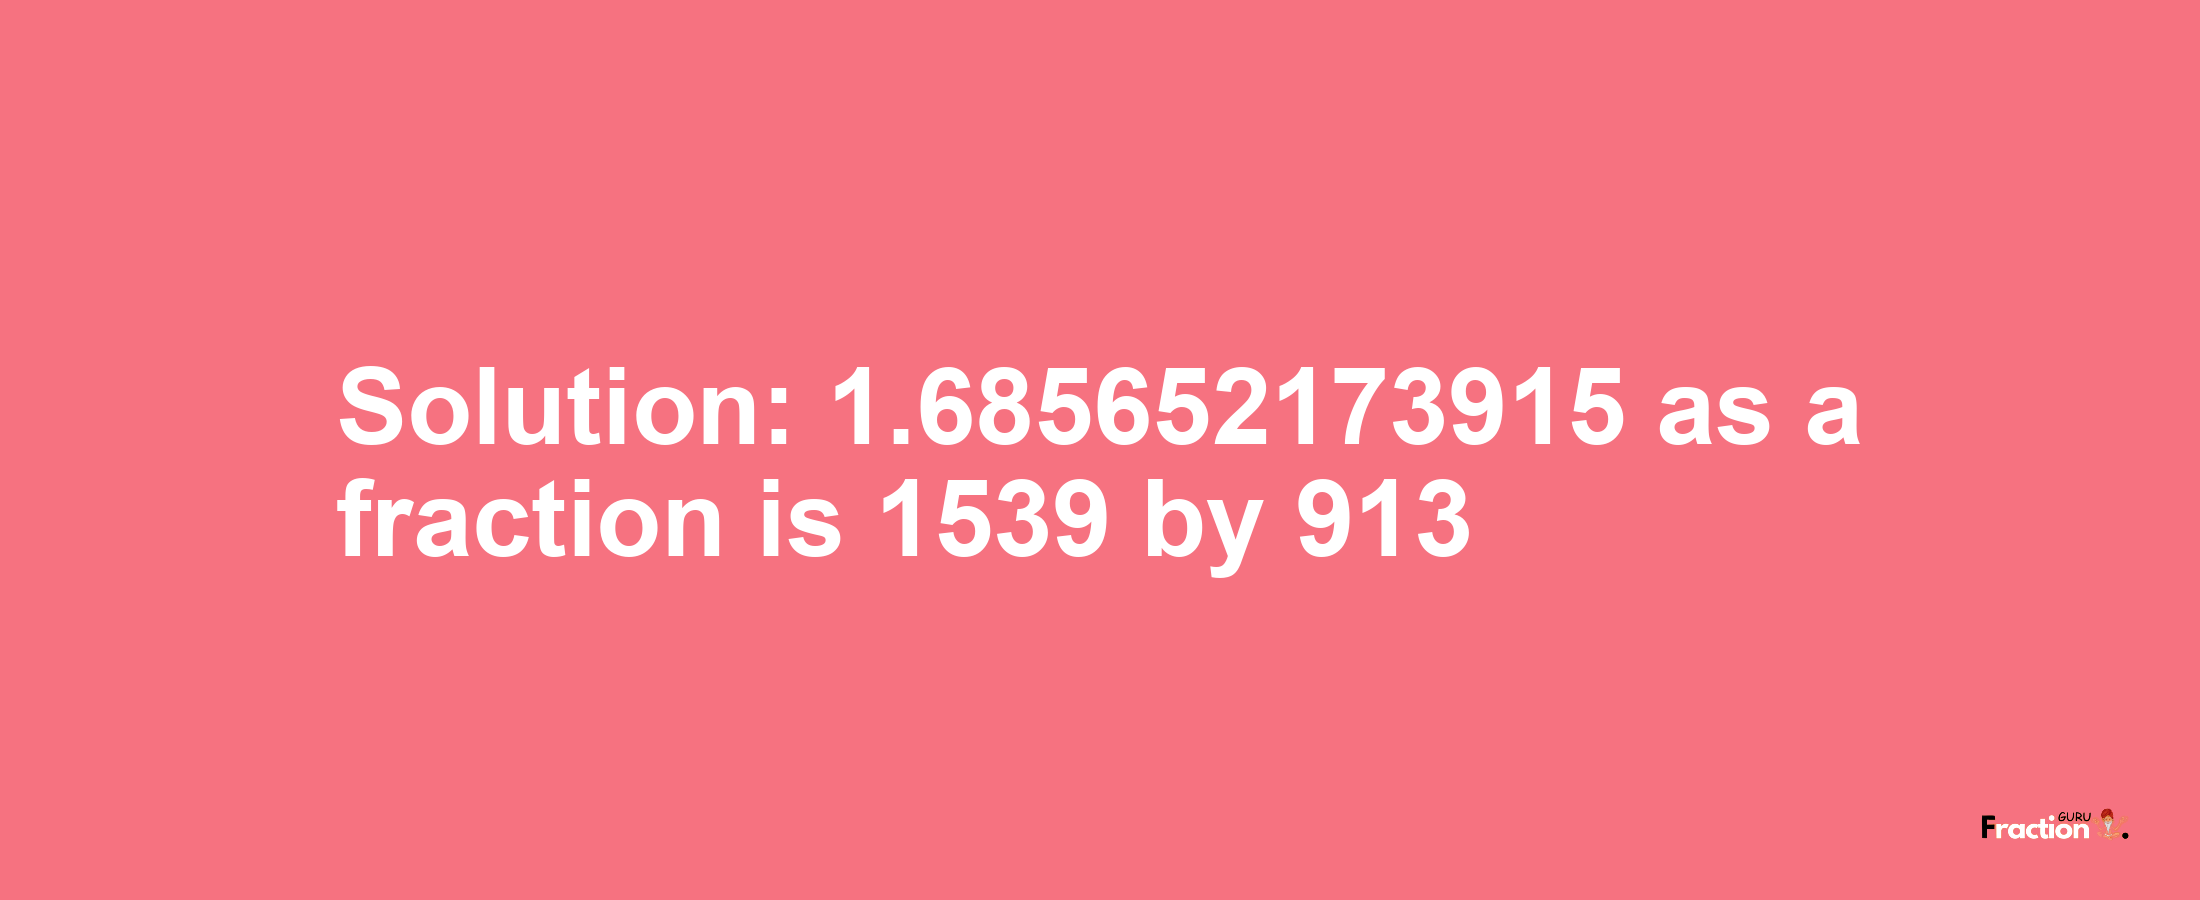 Solution:1.685652173915 as a fraction is 1539/913